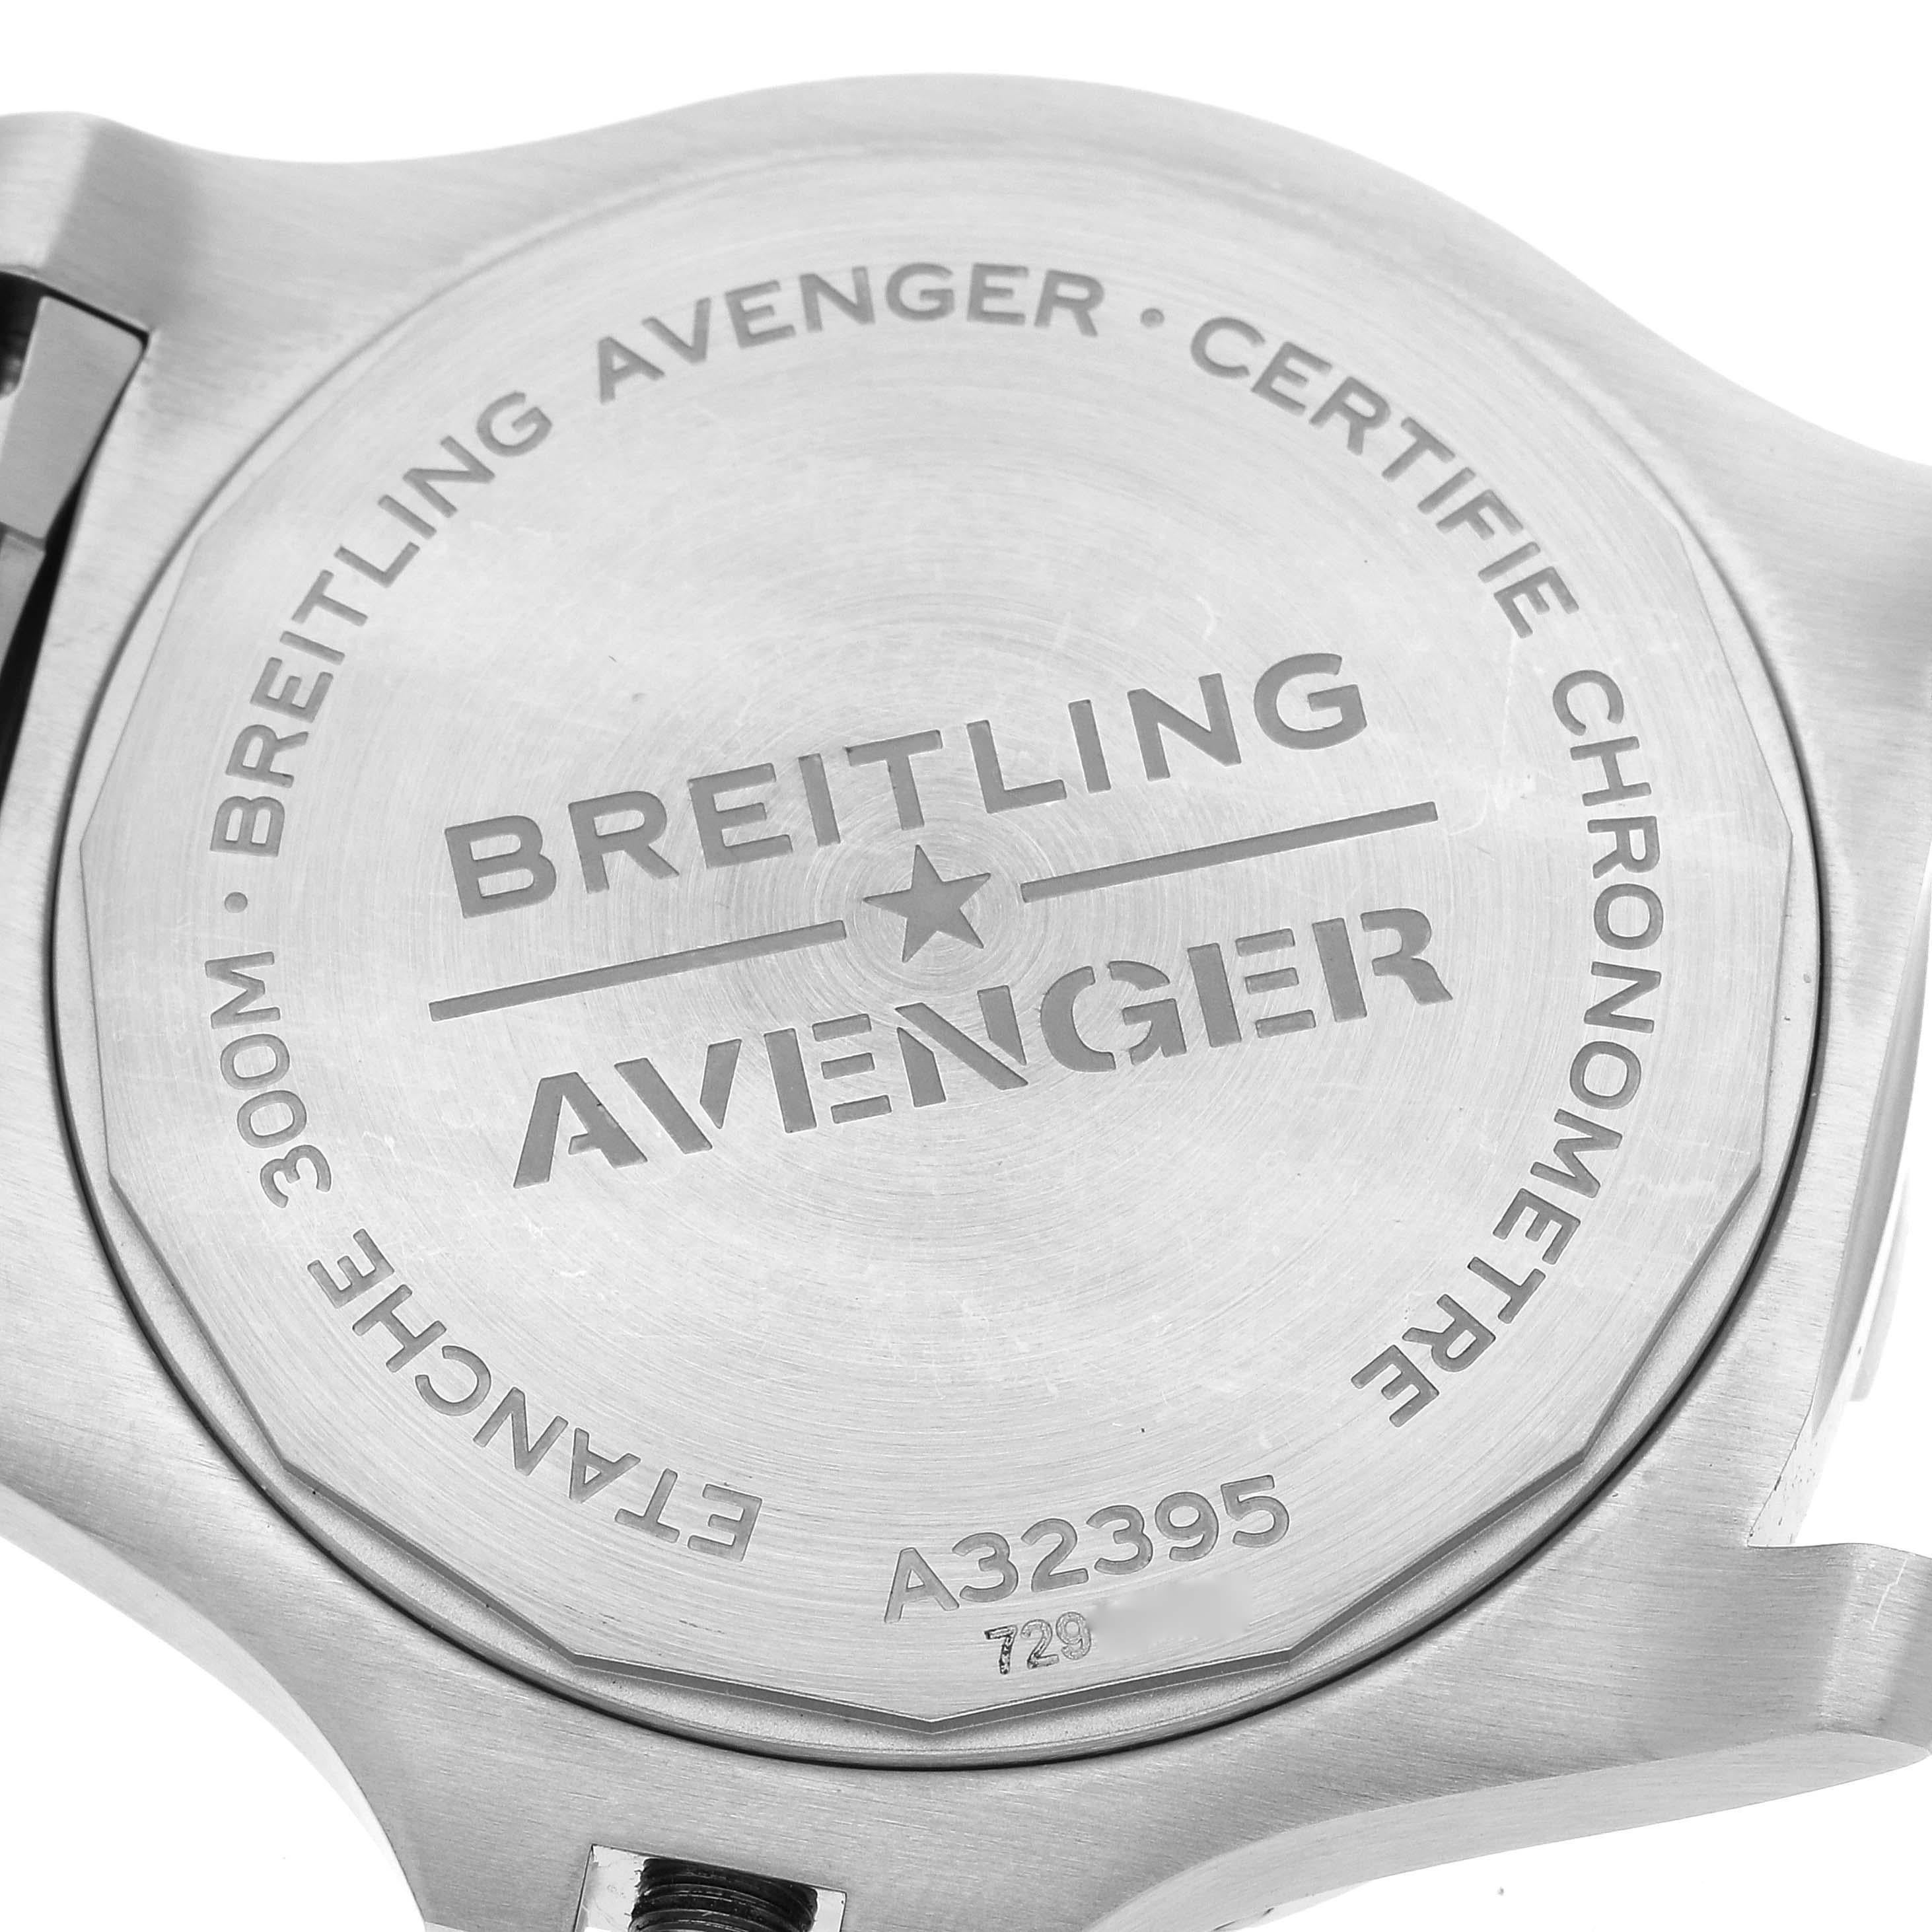 Breitling Aeromarine Avenger II GMT Blue Dial Steel Mens Watch A32395 Box Card For Sale 3